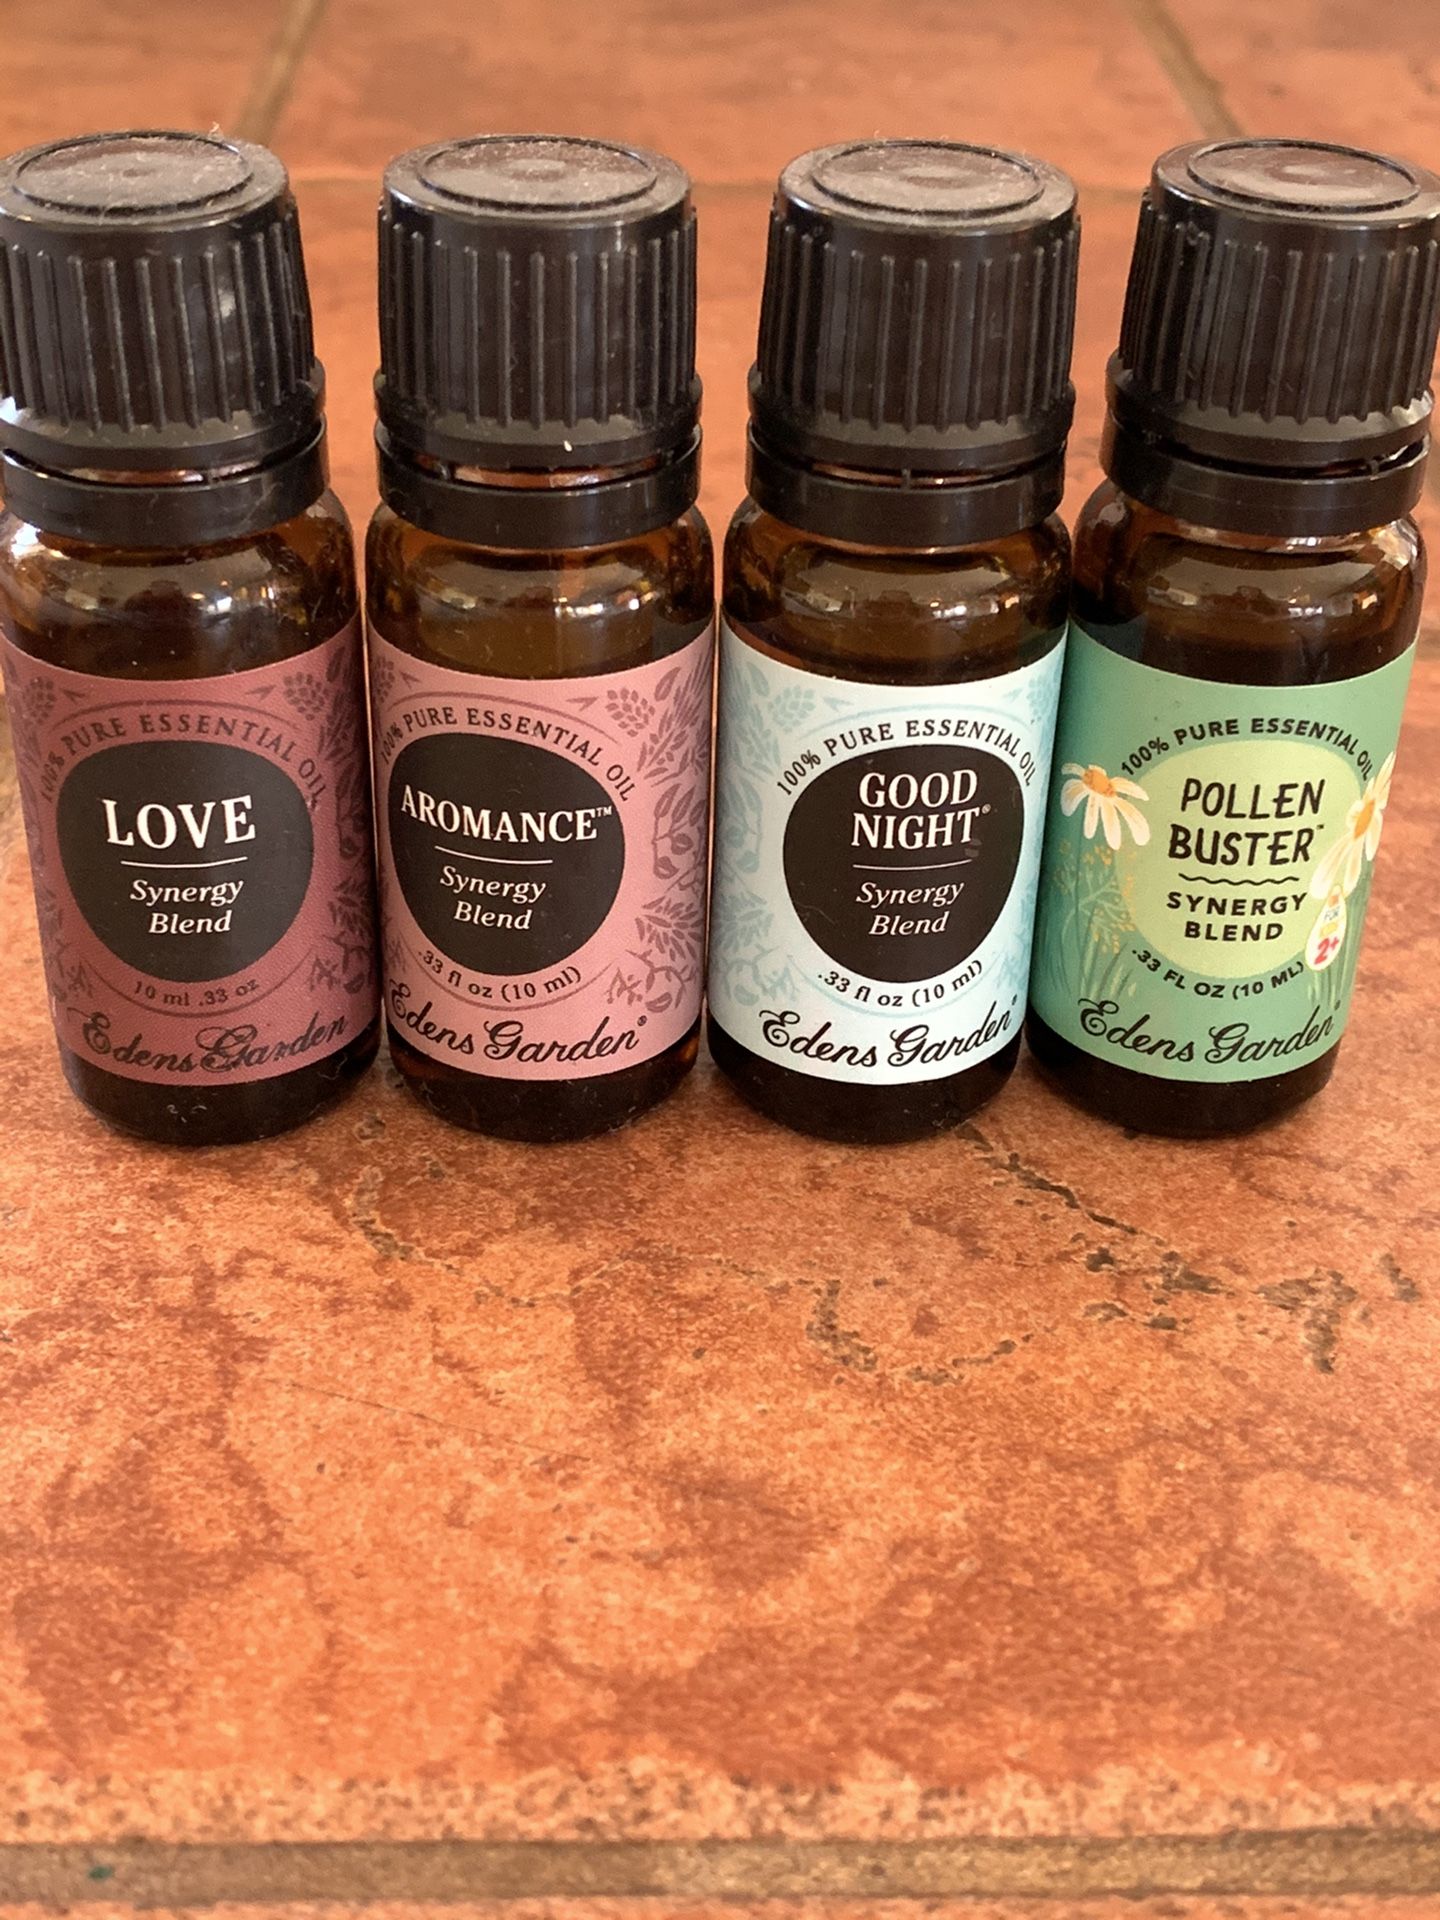 Eden’s Garden essential oils—used once or twice—$5 each